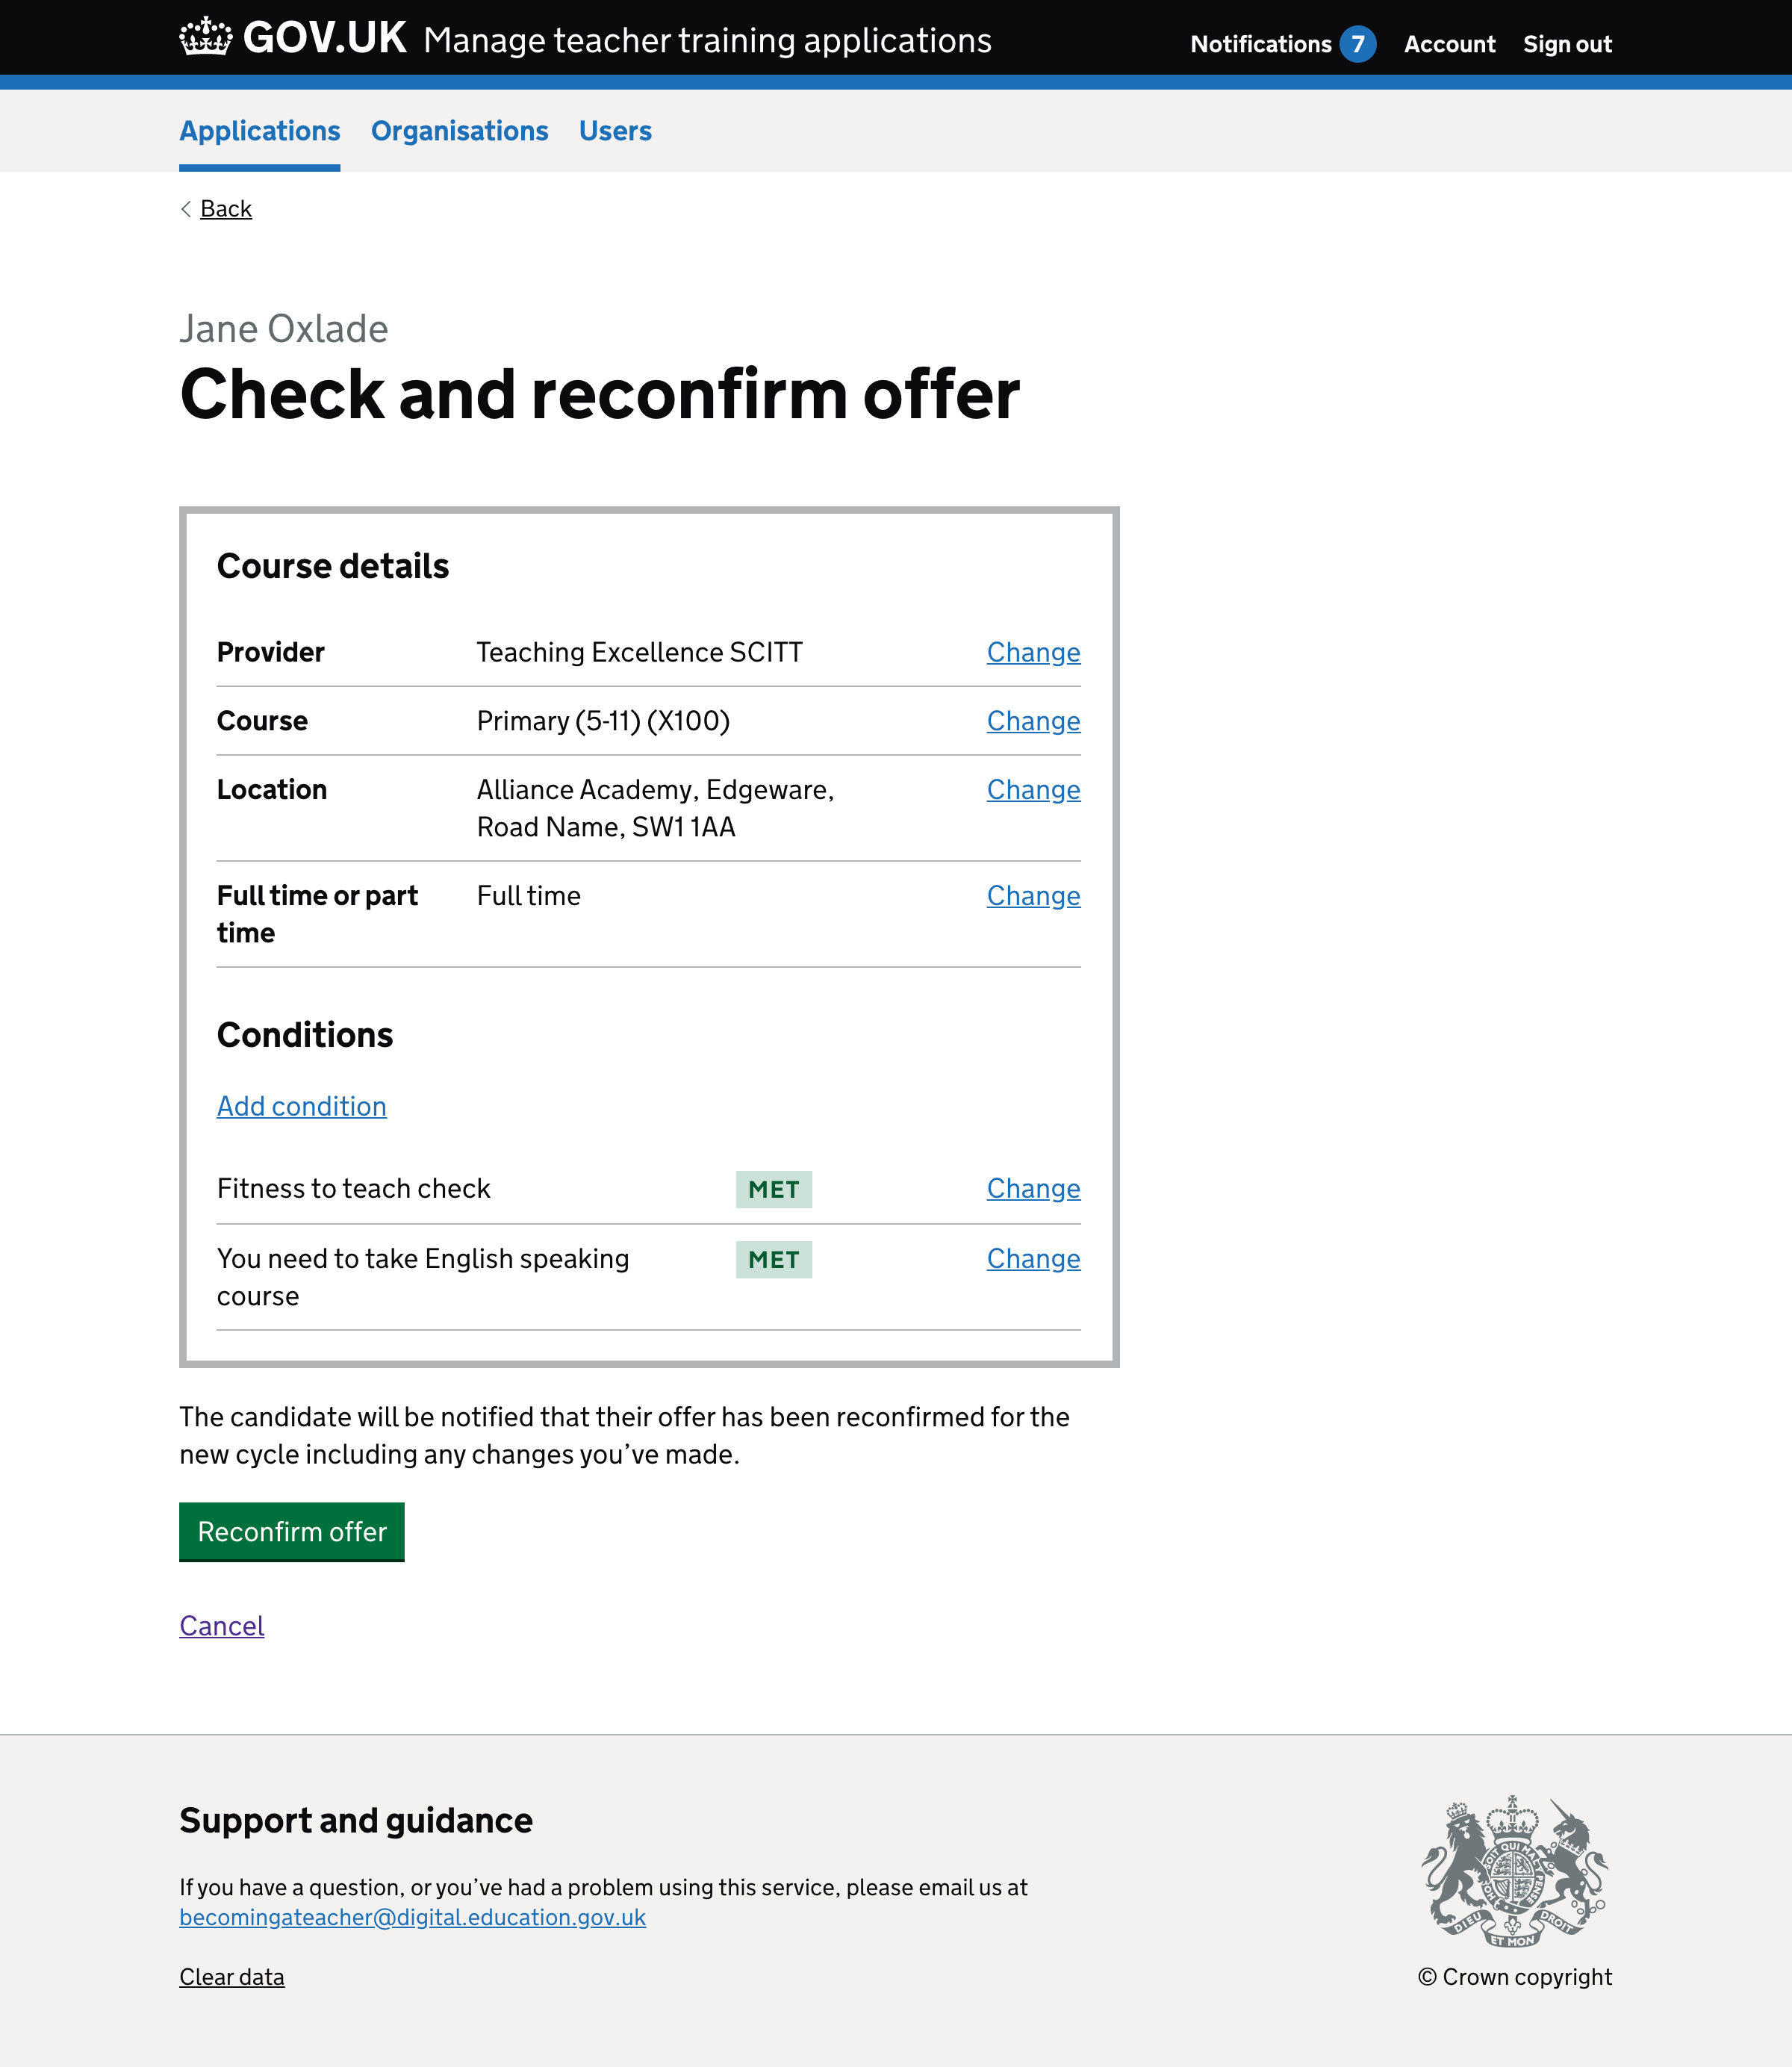 Screenshot of ‘Check and reconfirm offer’ page.